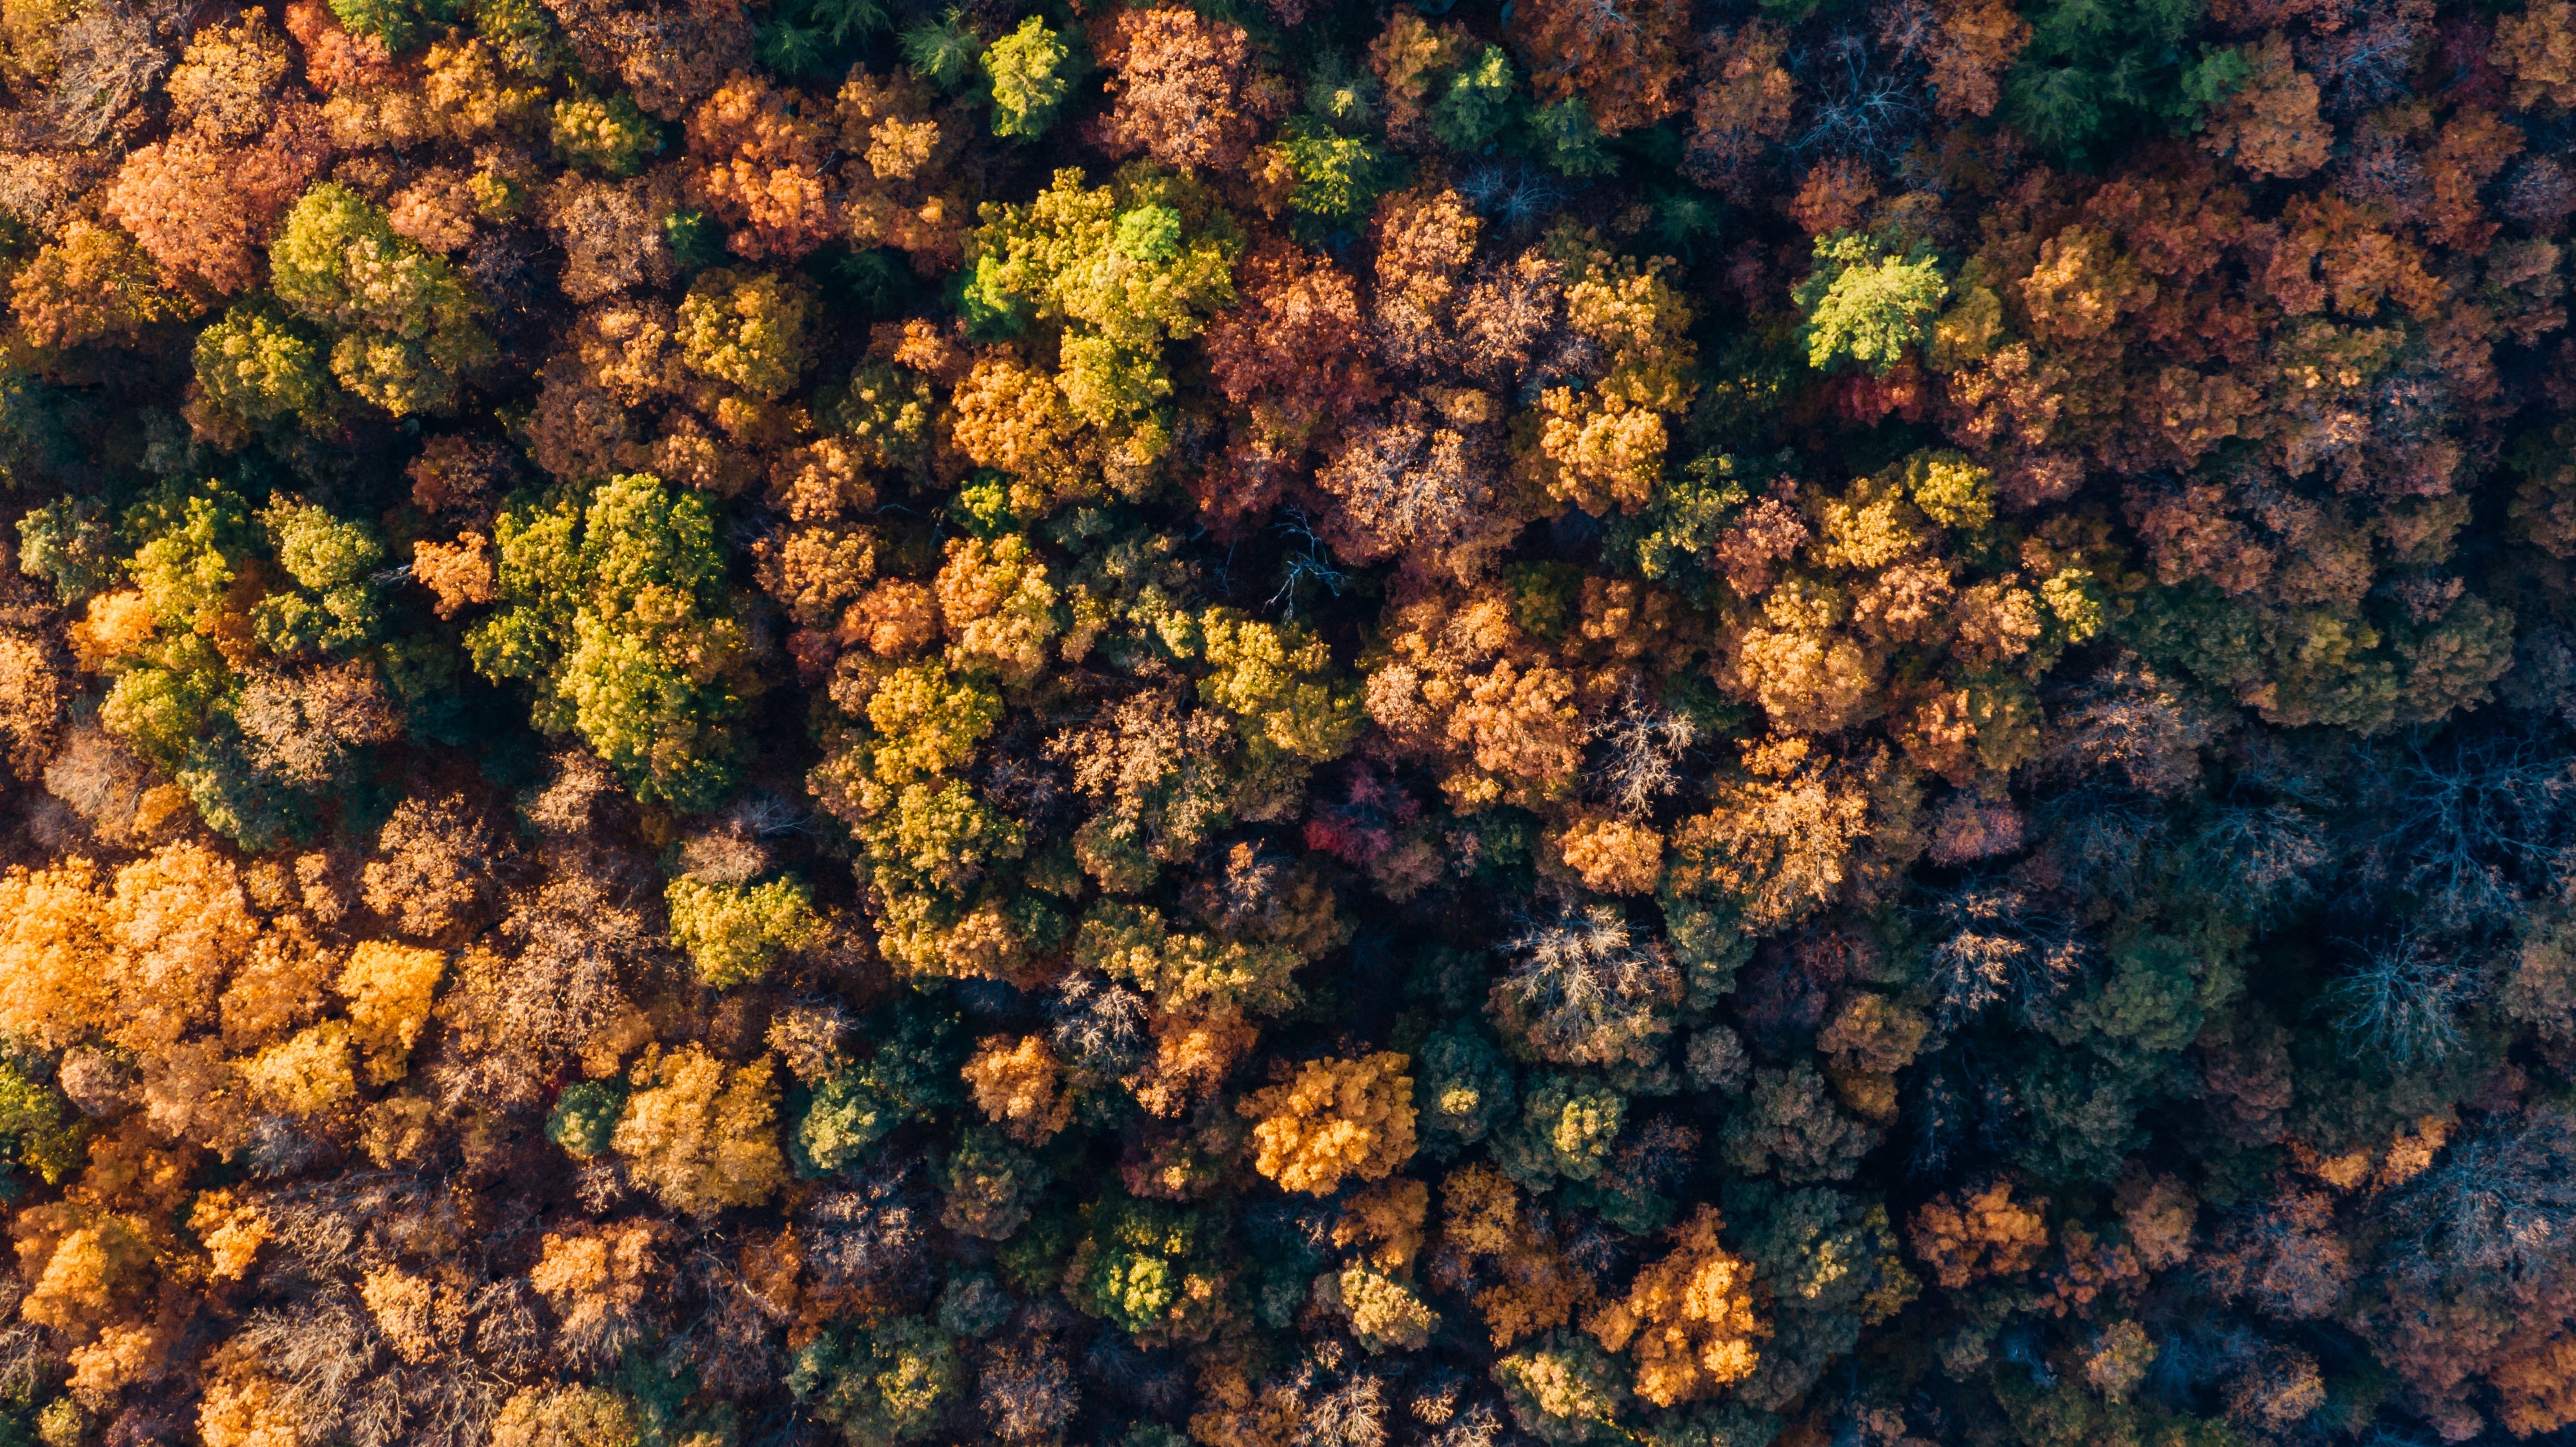 HD wallpaper, Aerial View, Top View, Autumn Forest, Autumn Trees